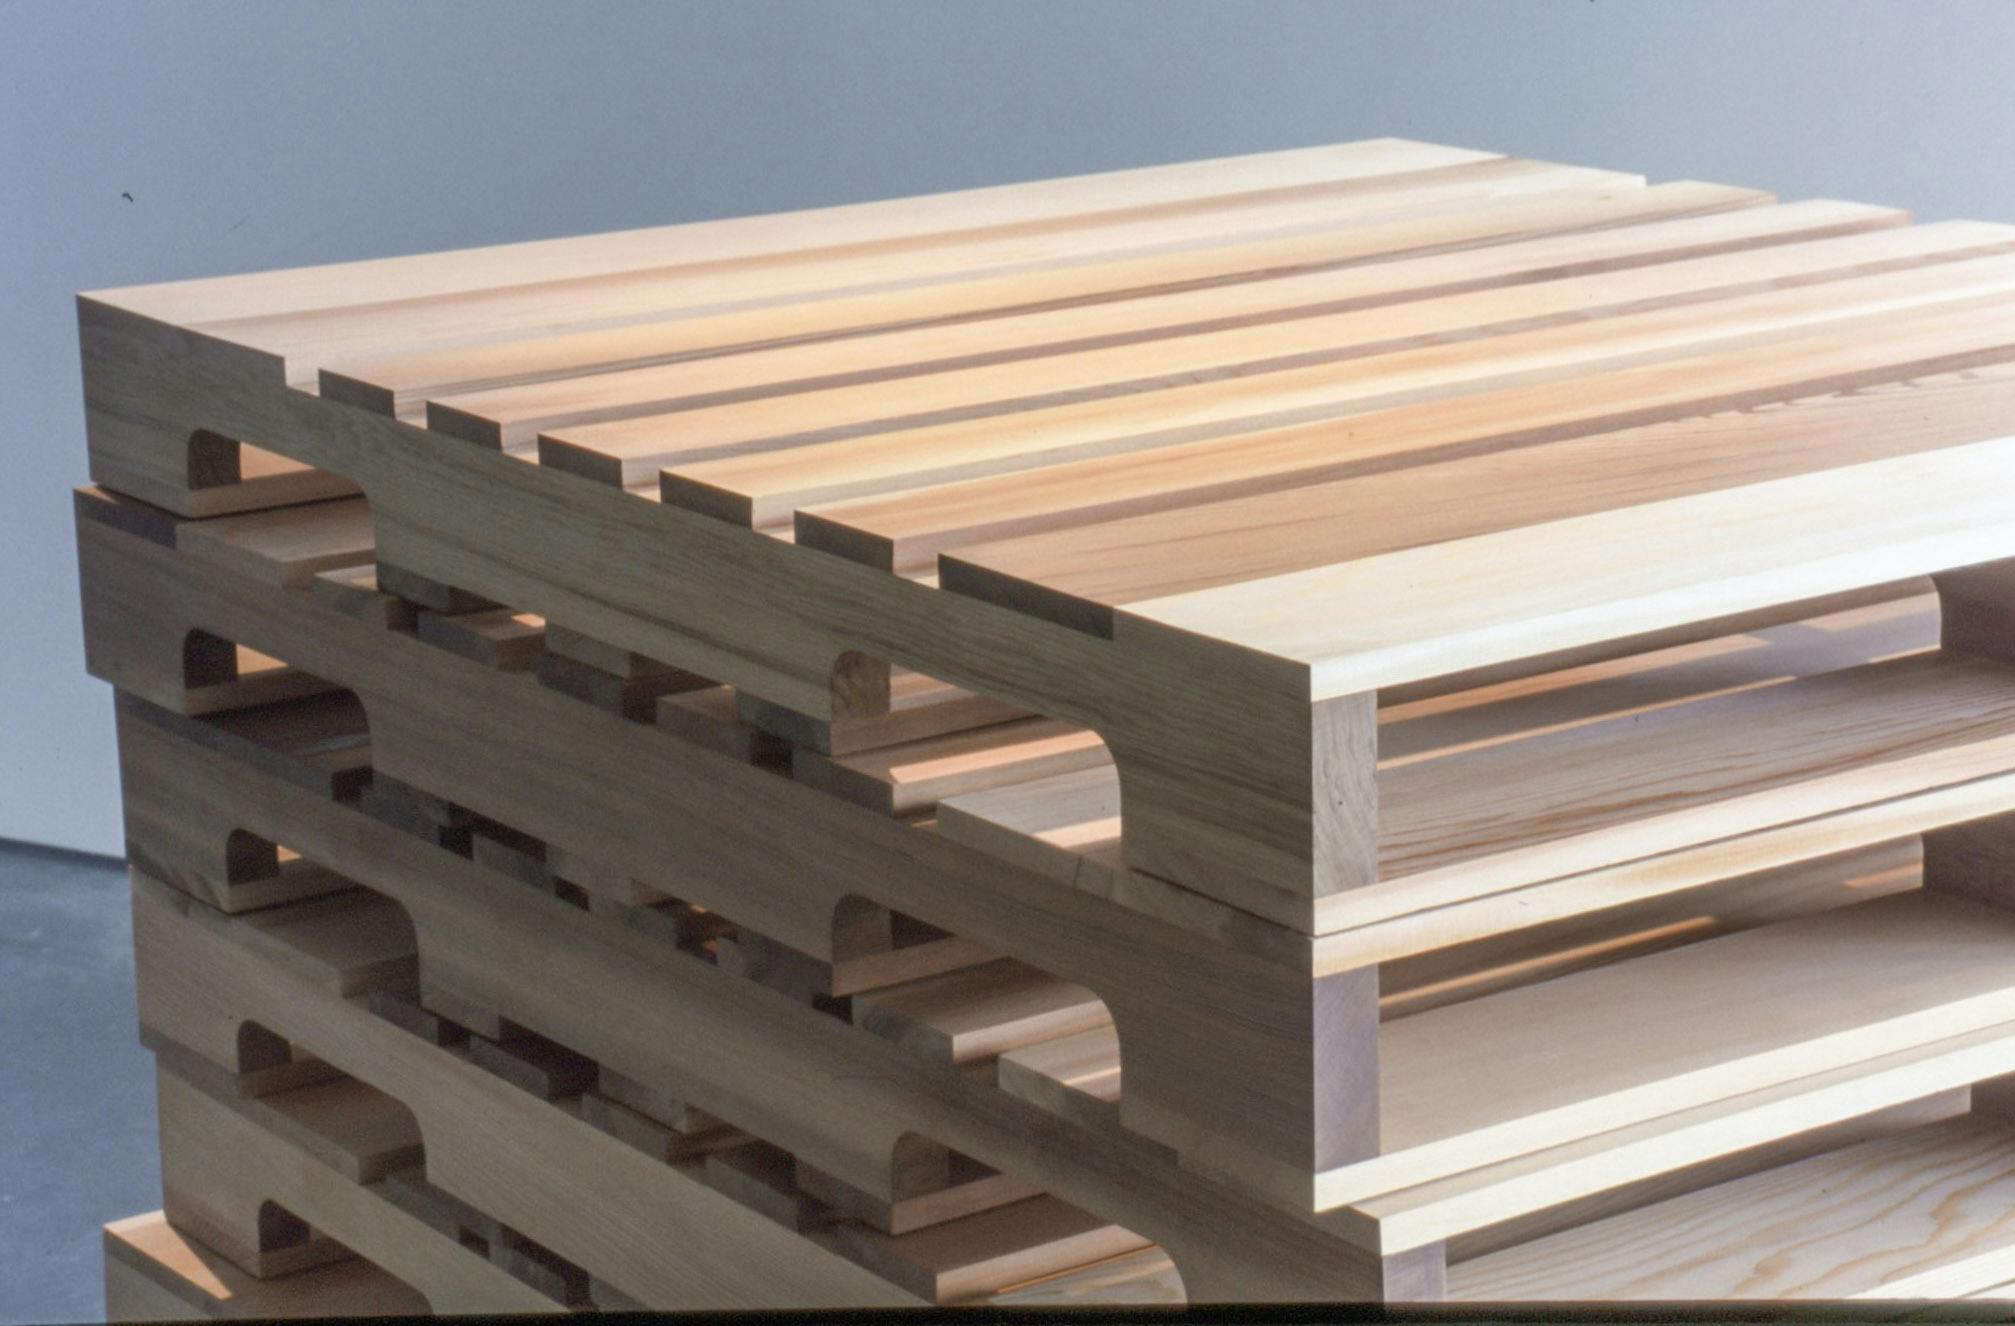 A stack of wood pieces, which look like large duckboards, is installed in a gallery space. They are identical in shape and size. This close-up photograph shows only the top five boards on this stack. 